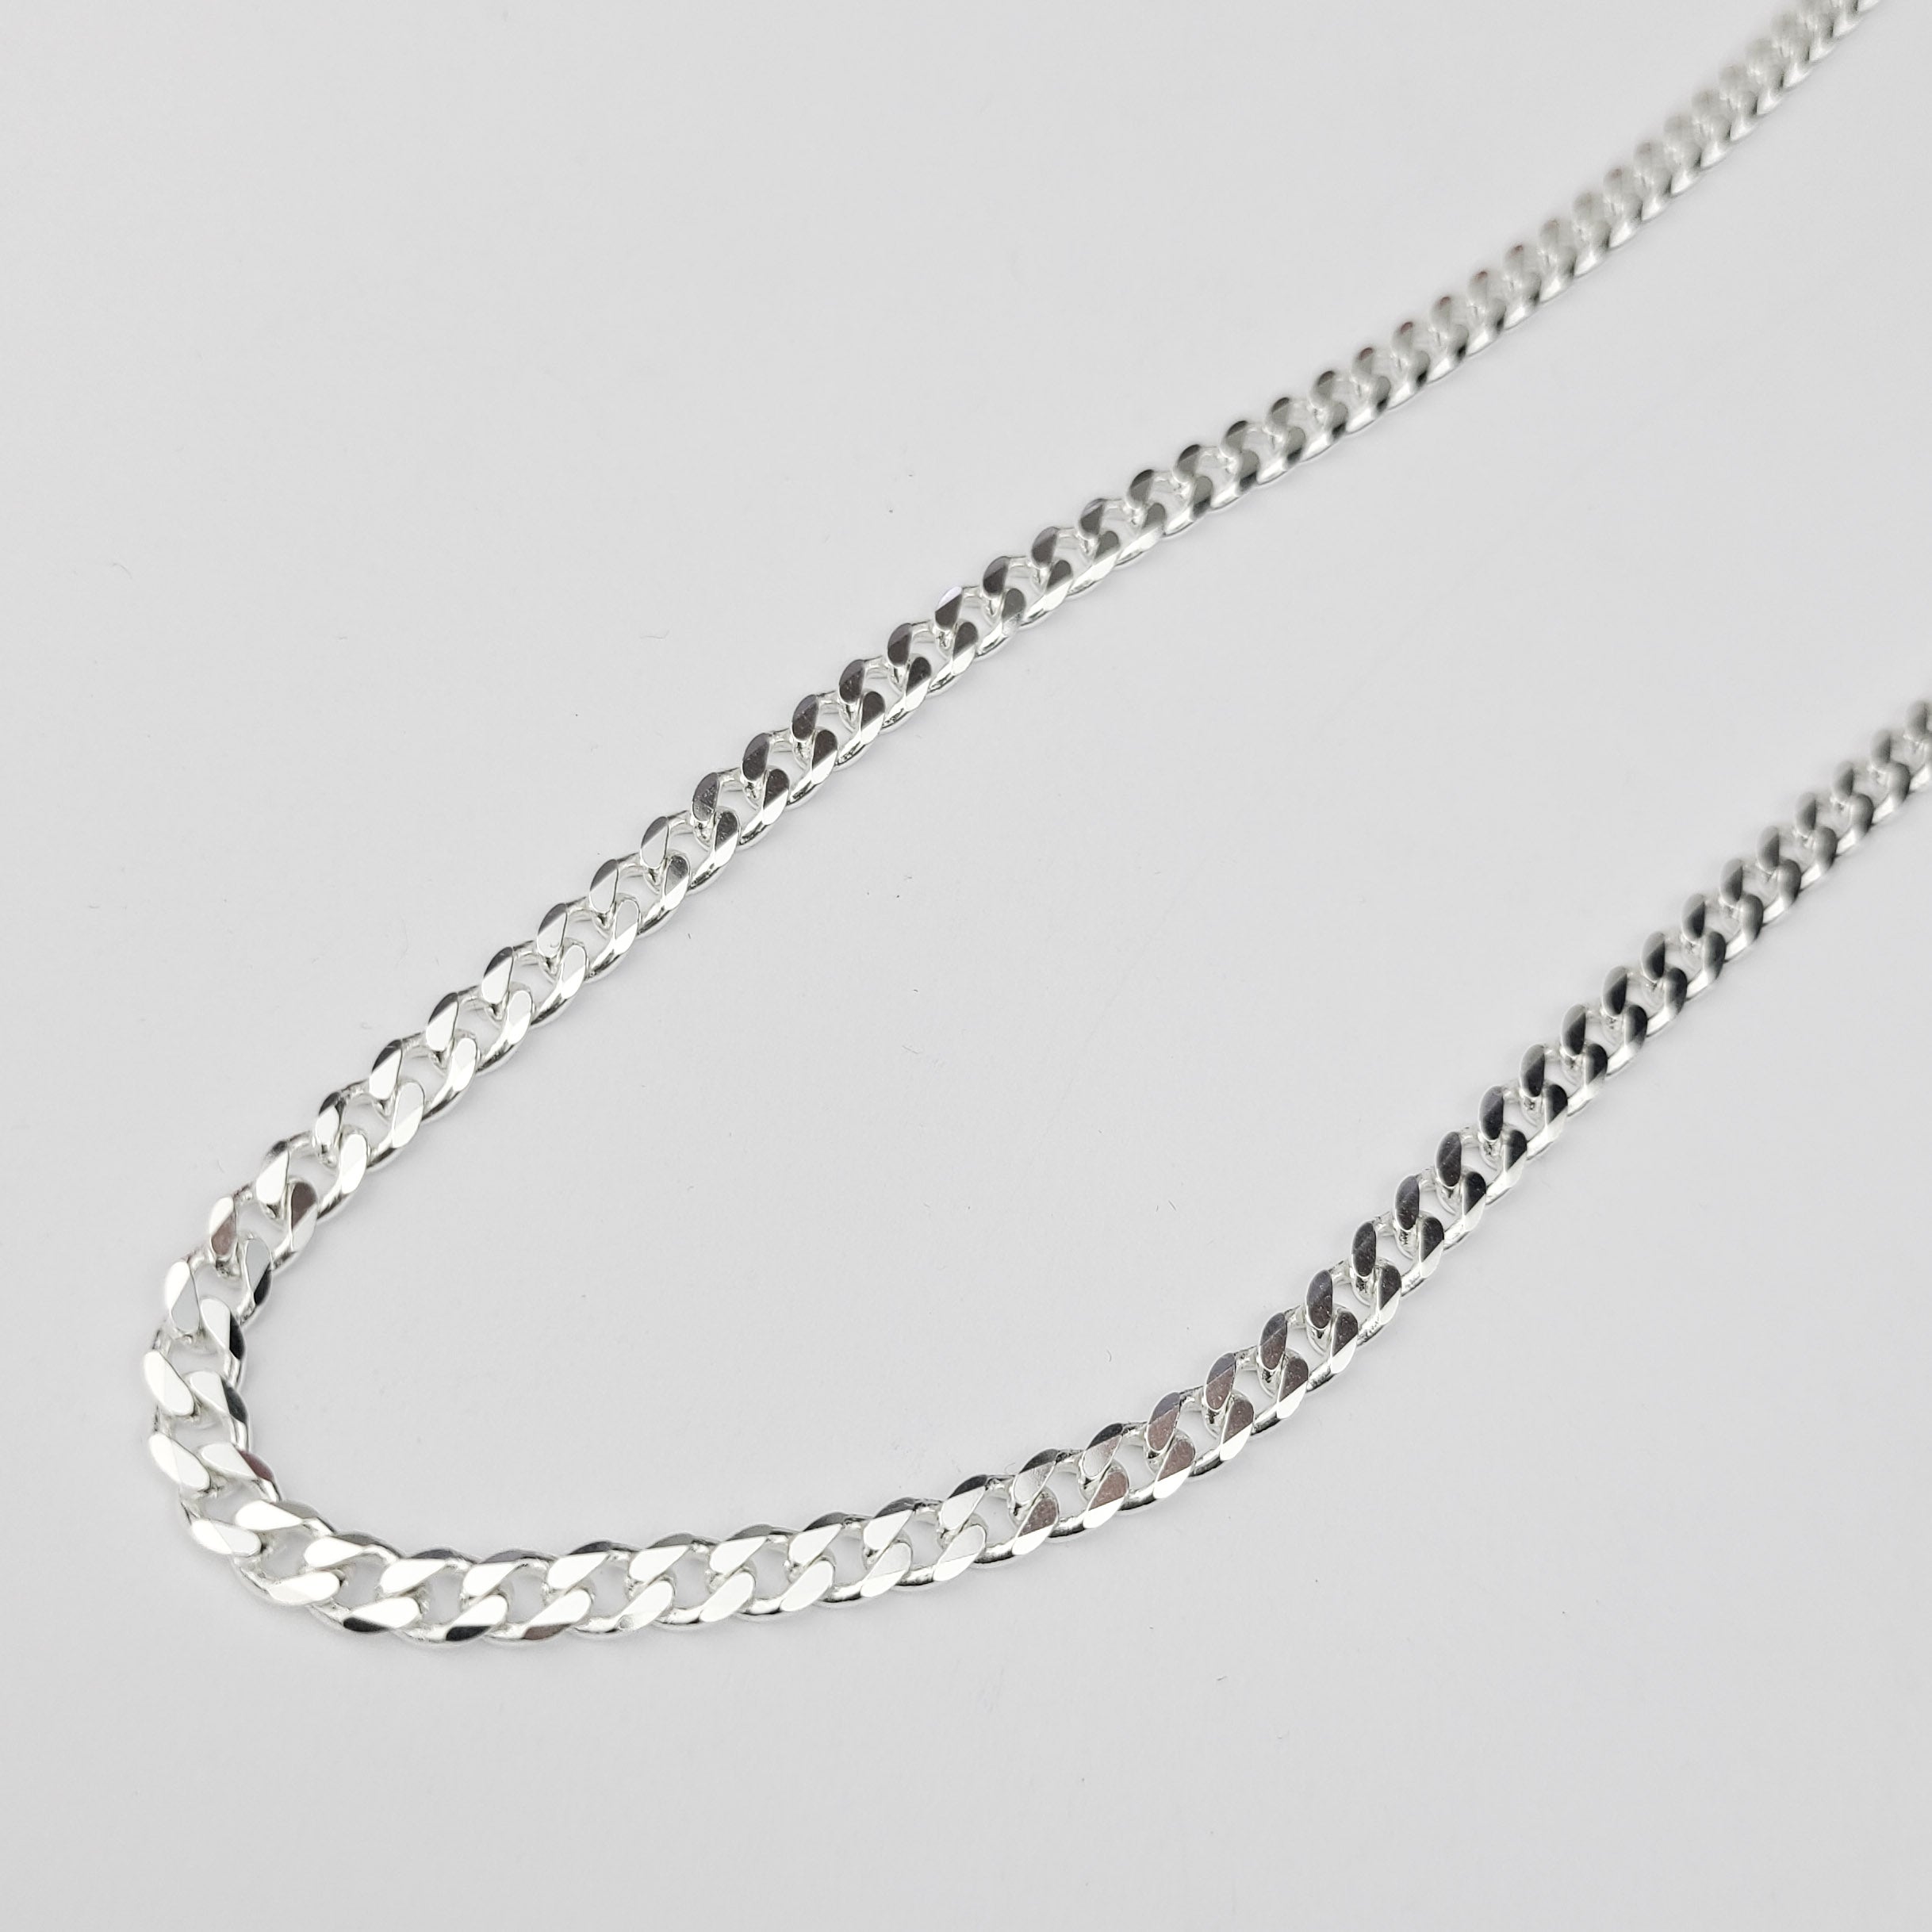 Silver 4mm Curb Chain Necklace for Men or Women / Stainless Steel Water  Safe Non Tarnish Chain / Simple Silver Men's Chain / Gift for Him - Etsy